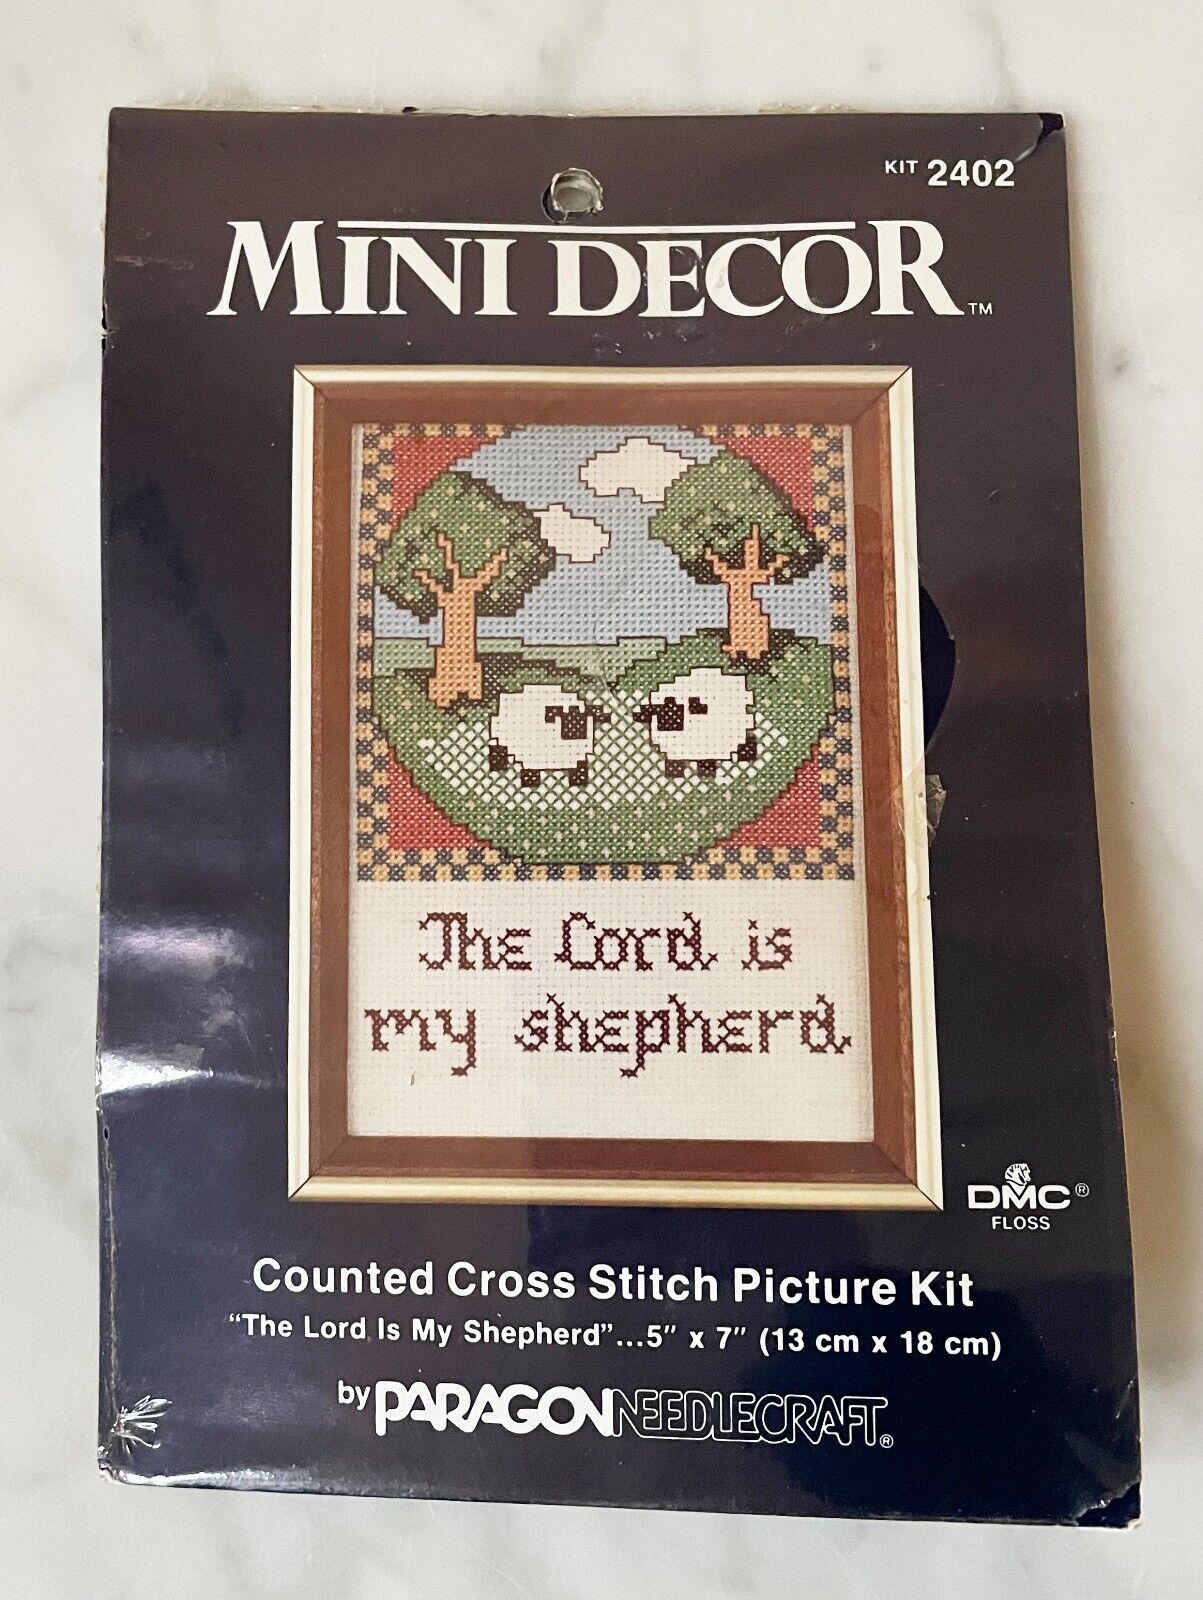 The Lord is My Shepherd Counted Cross Stitch Kit - Paragon Needlecraft 5" x 7" - $9.45